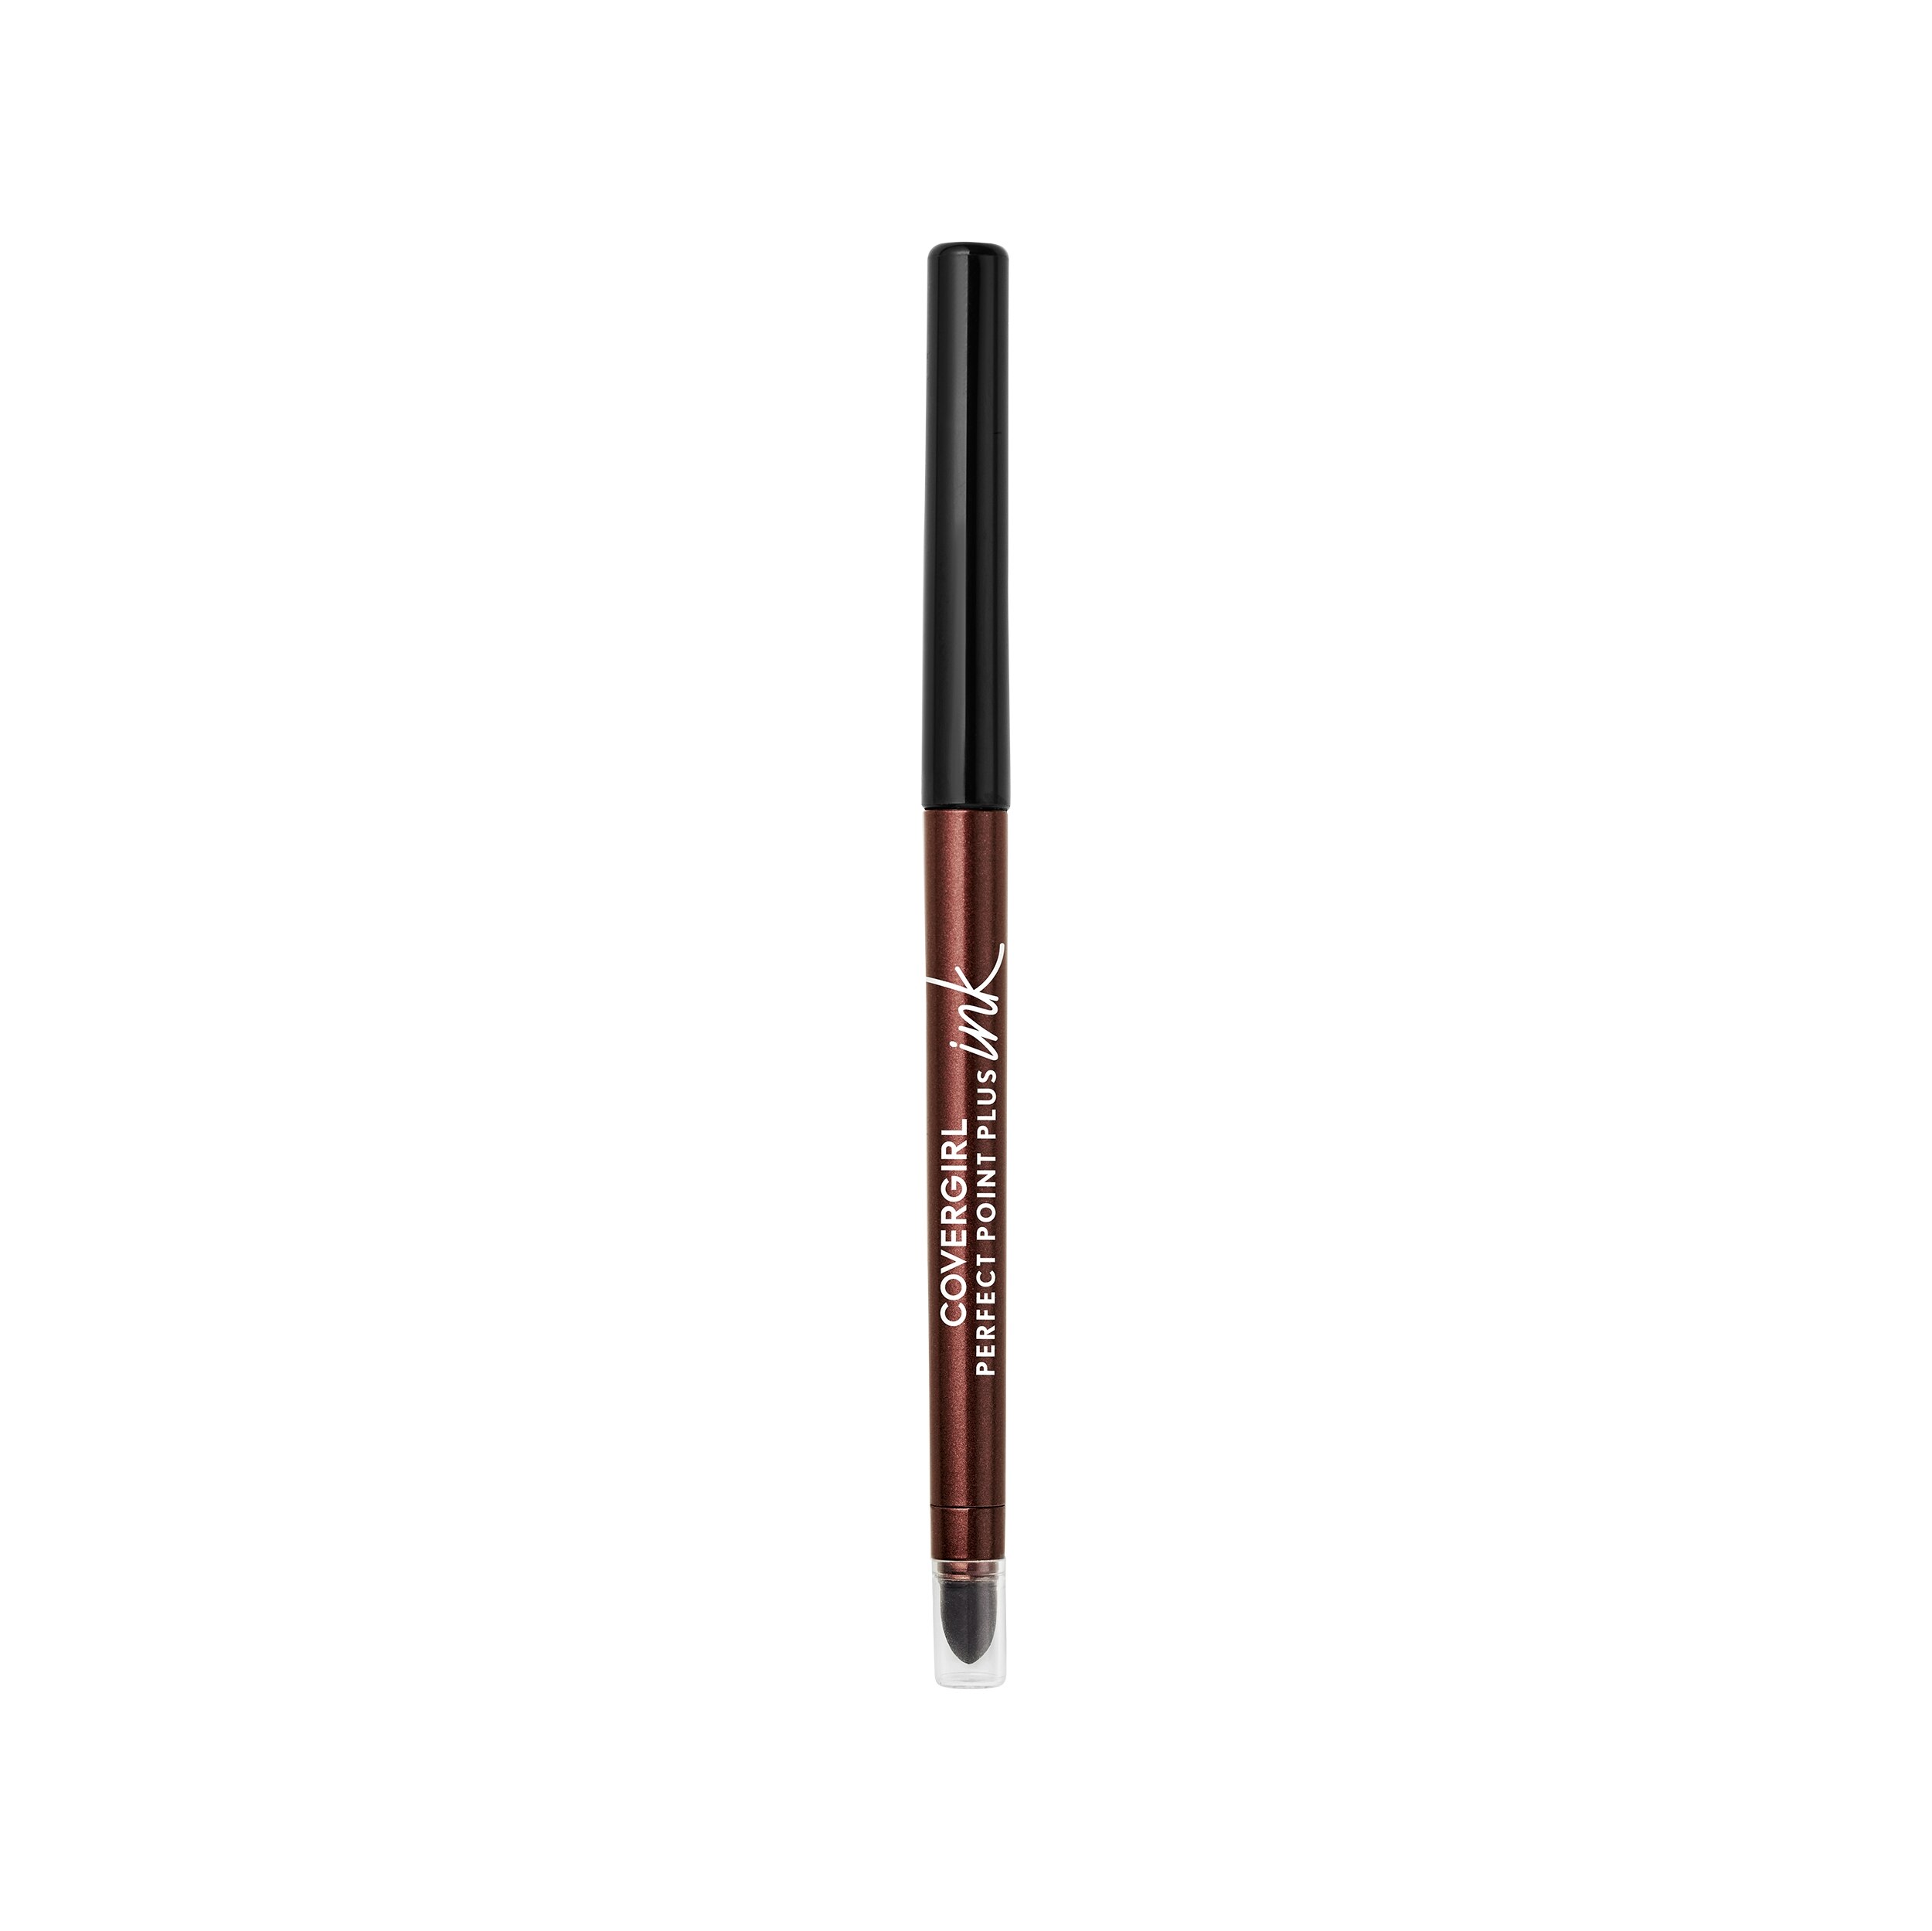 Covergirl Perfect Point Plus Ink Gel Eye Pencil